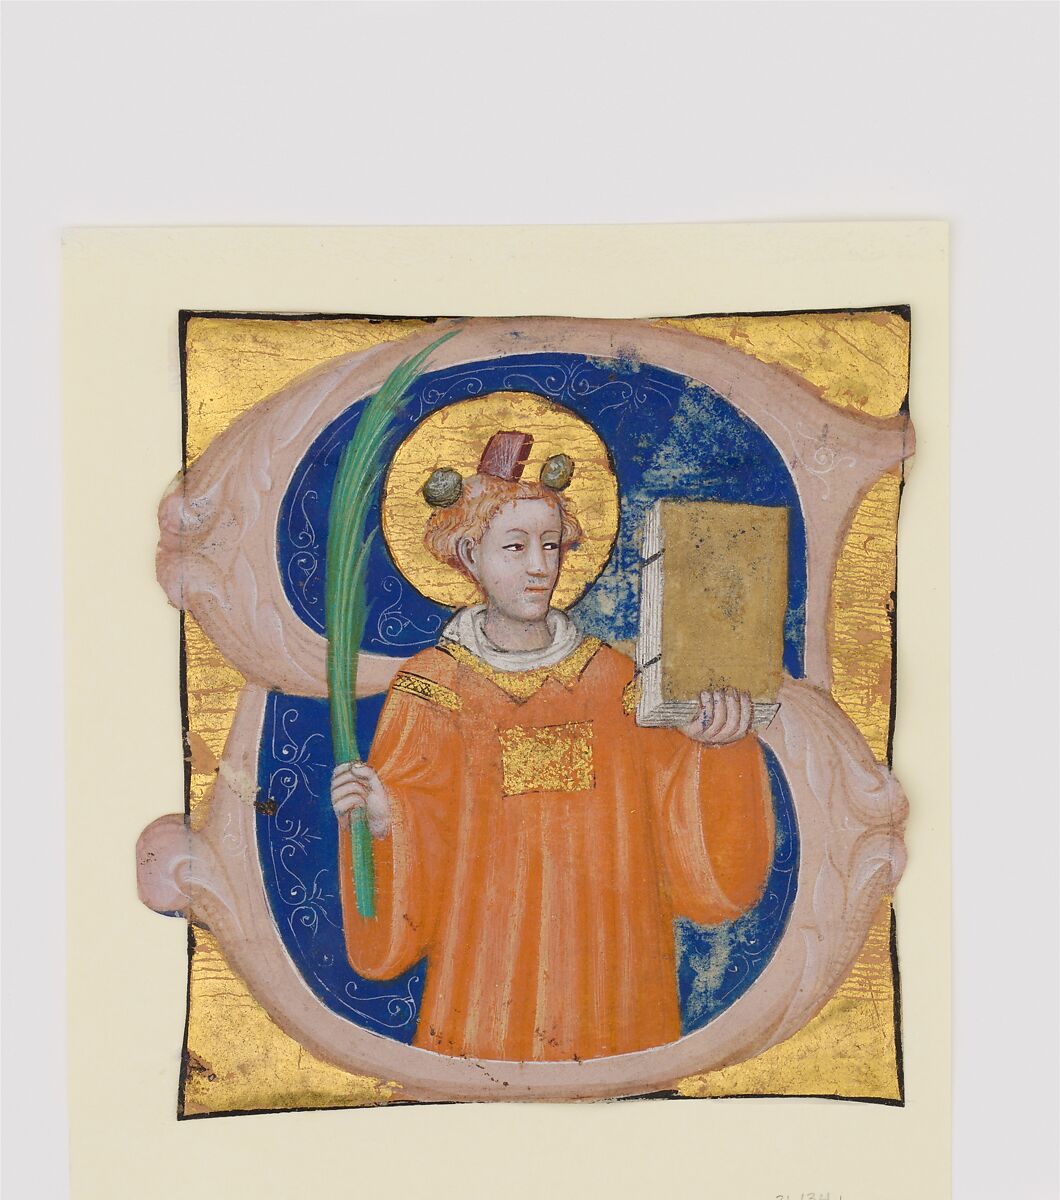 Manuscript Illumination with Saint Stephen in an Initial S, from an Antiphonary, Master of the Brussels Initials (Italian, Bologna, active ca. 1390–ca. 1420), Tempera, ink, and gold on parchment, Italian 